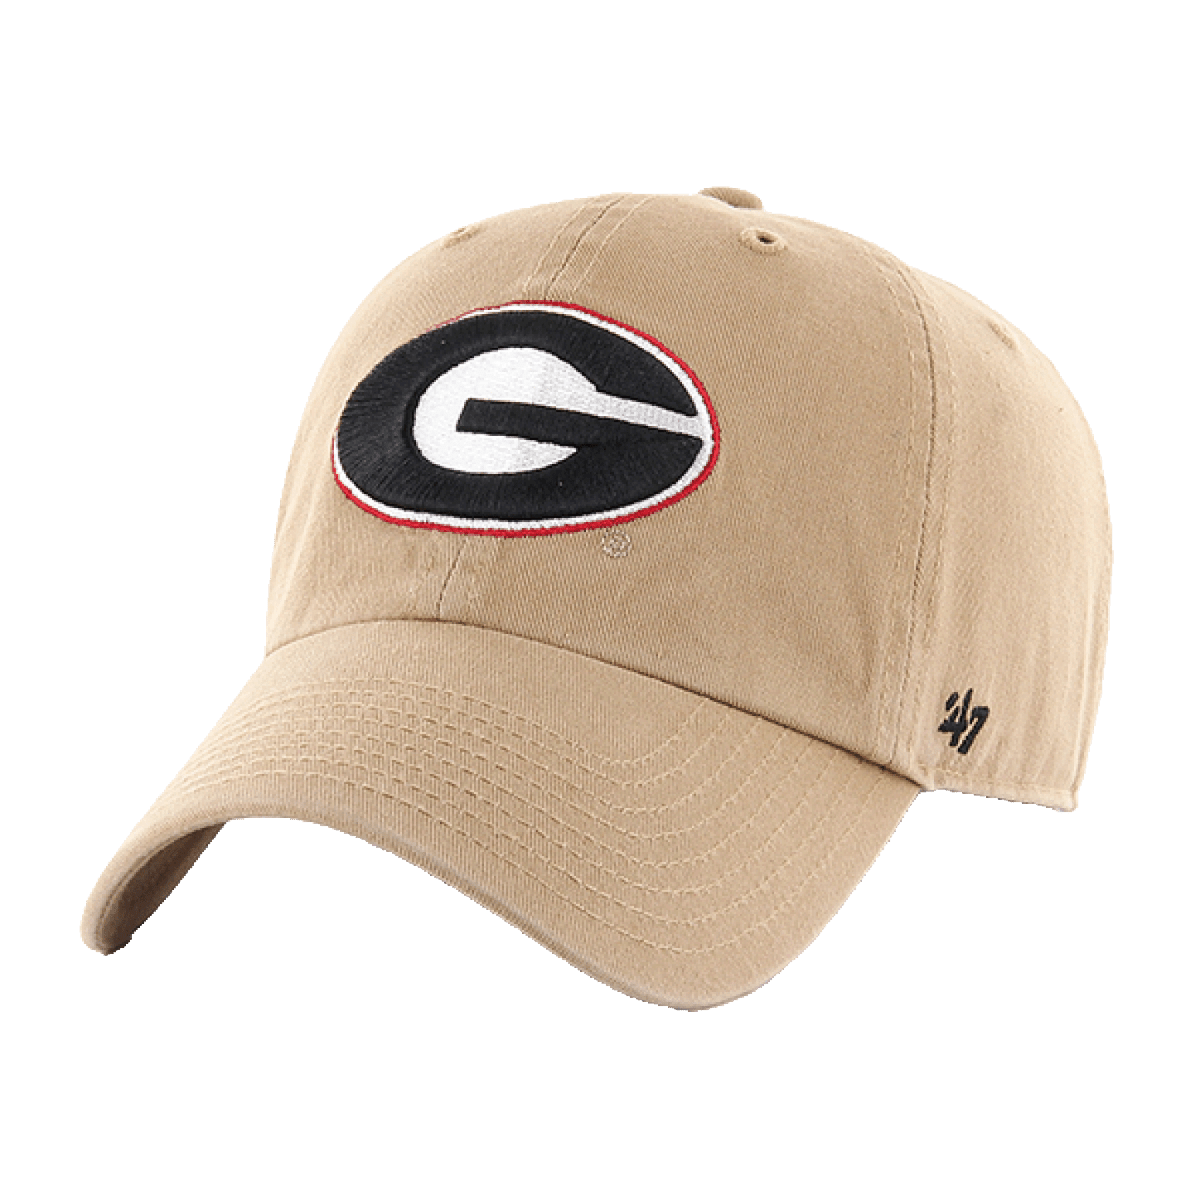 University of Georgia 47 Brand Clean Up All Hat - Shop B-Unlimited